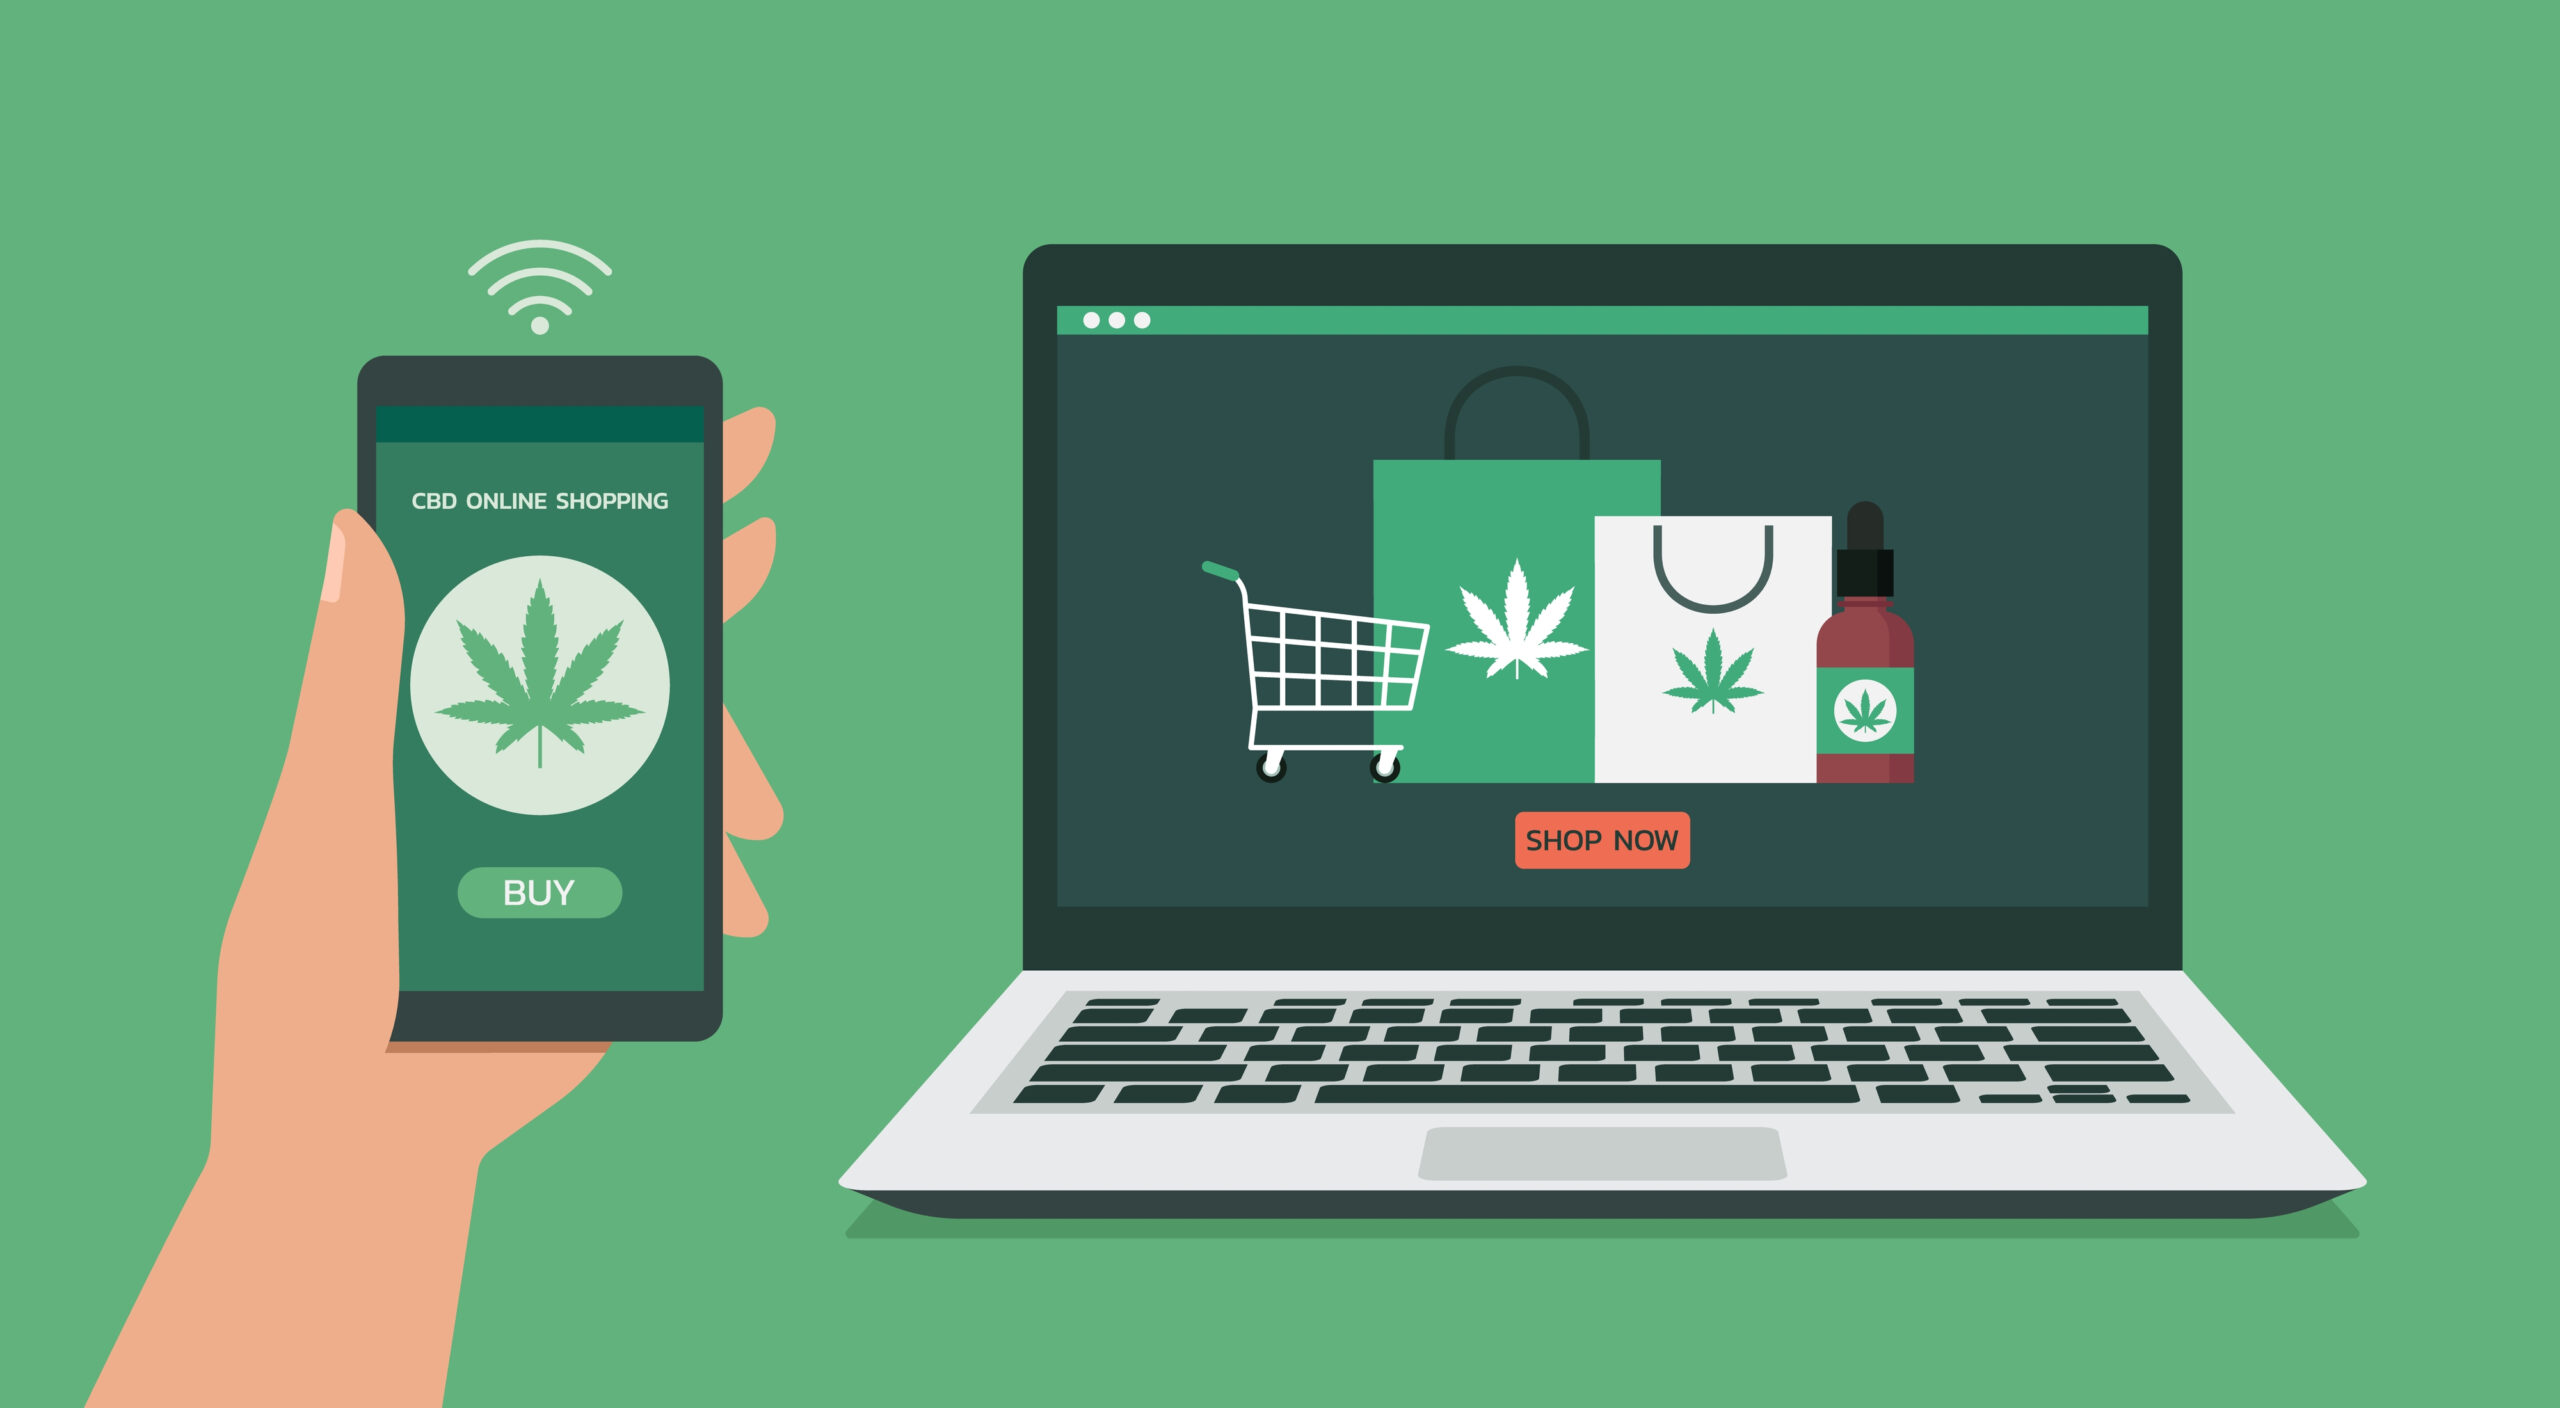 Shopping for cannabis online